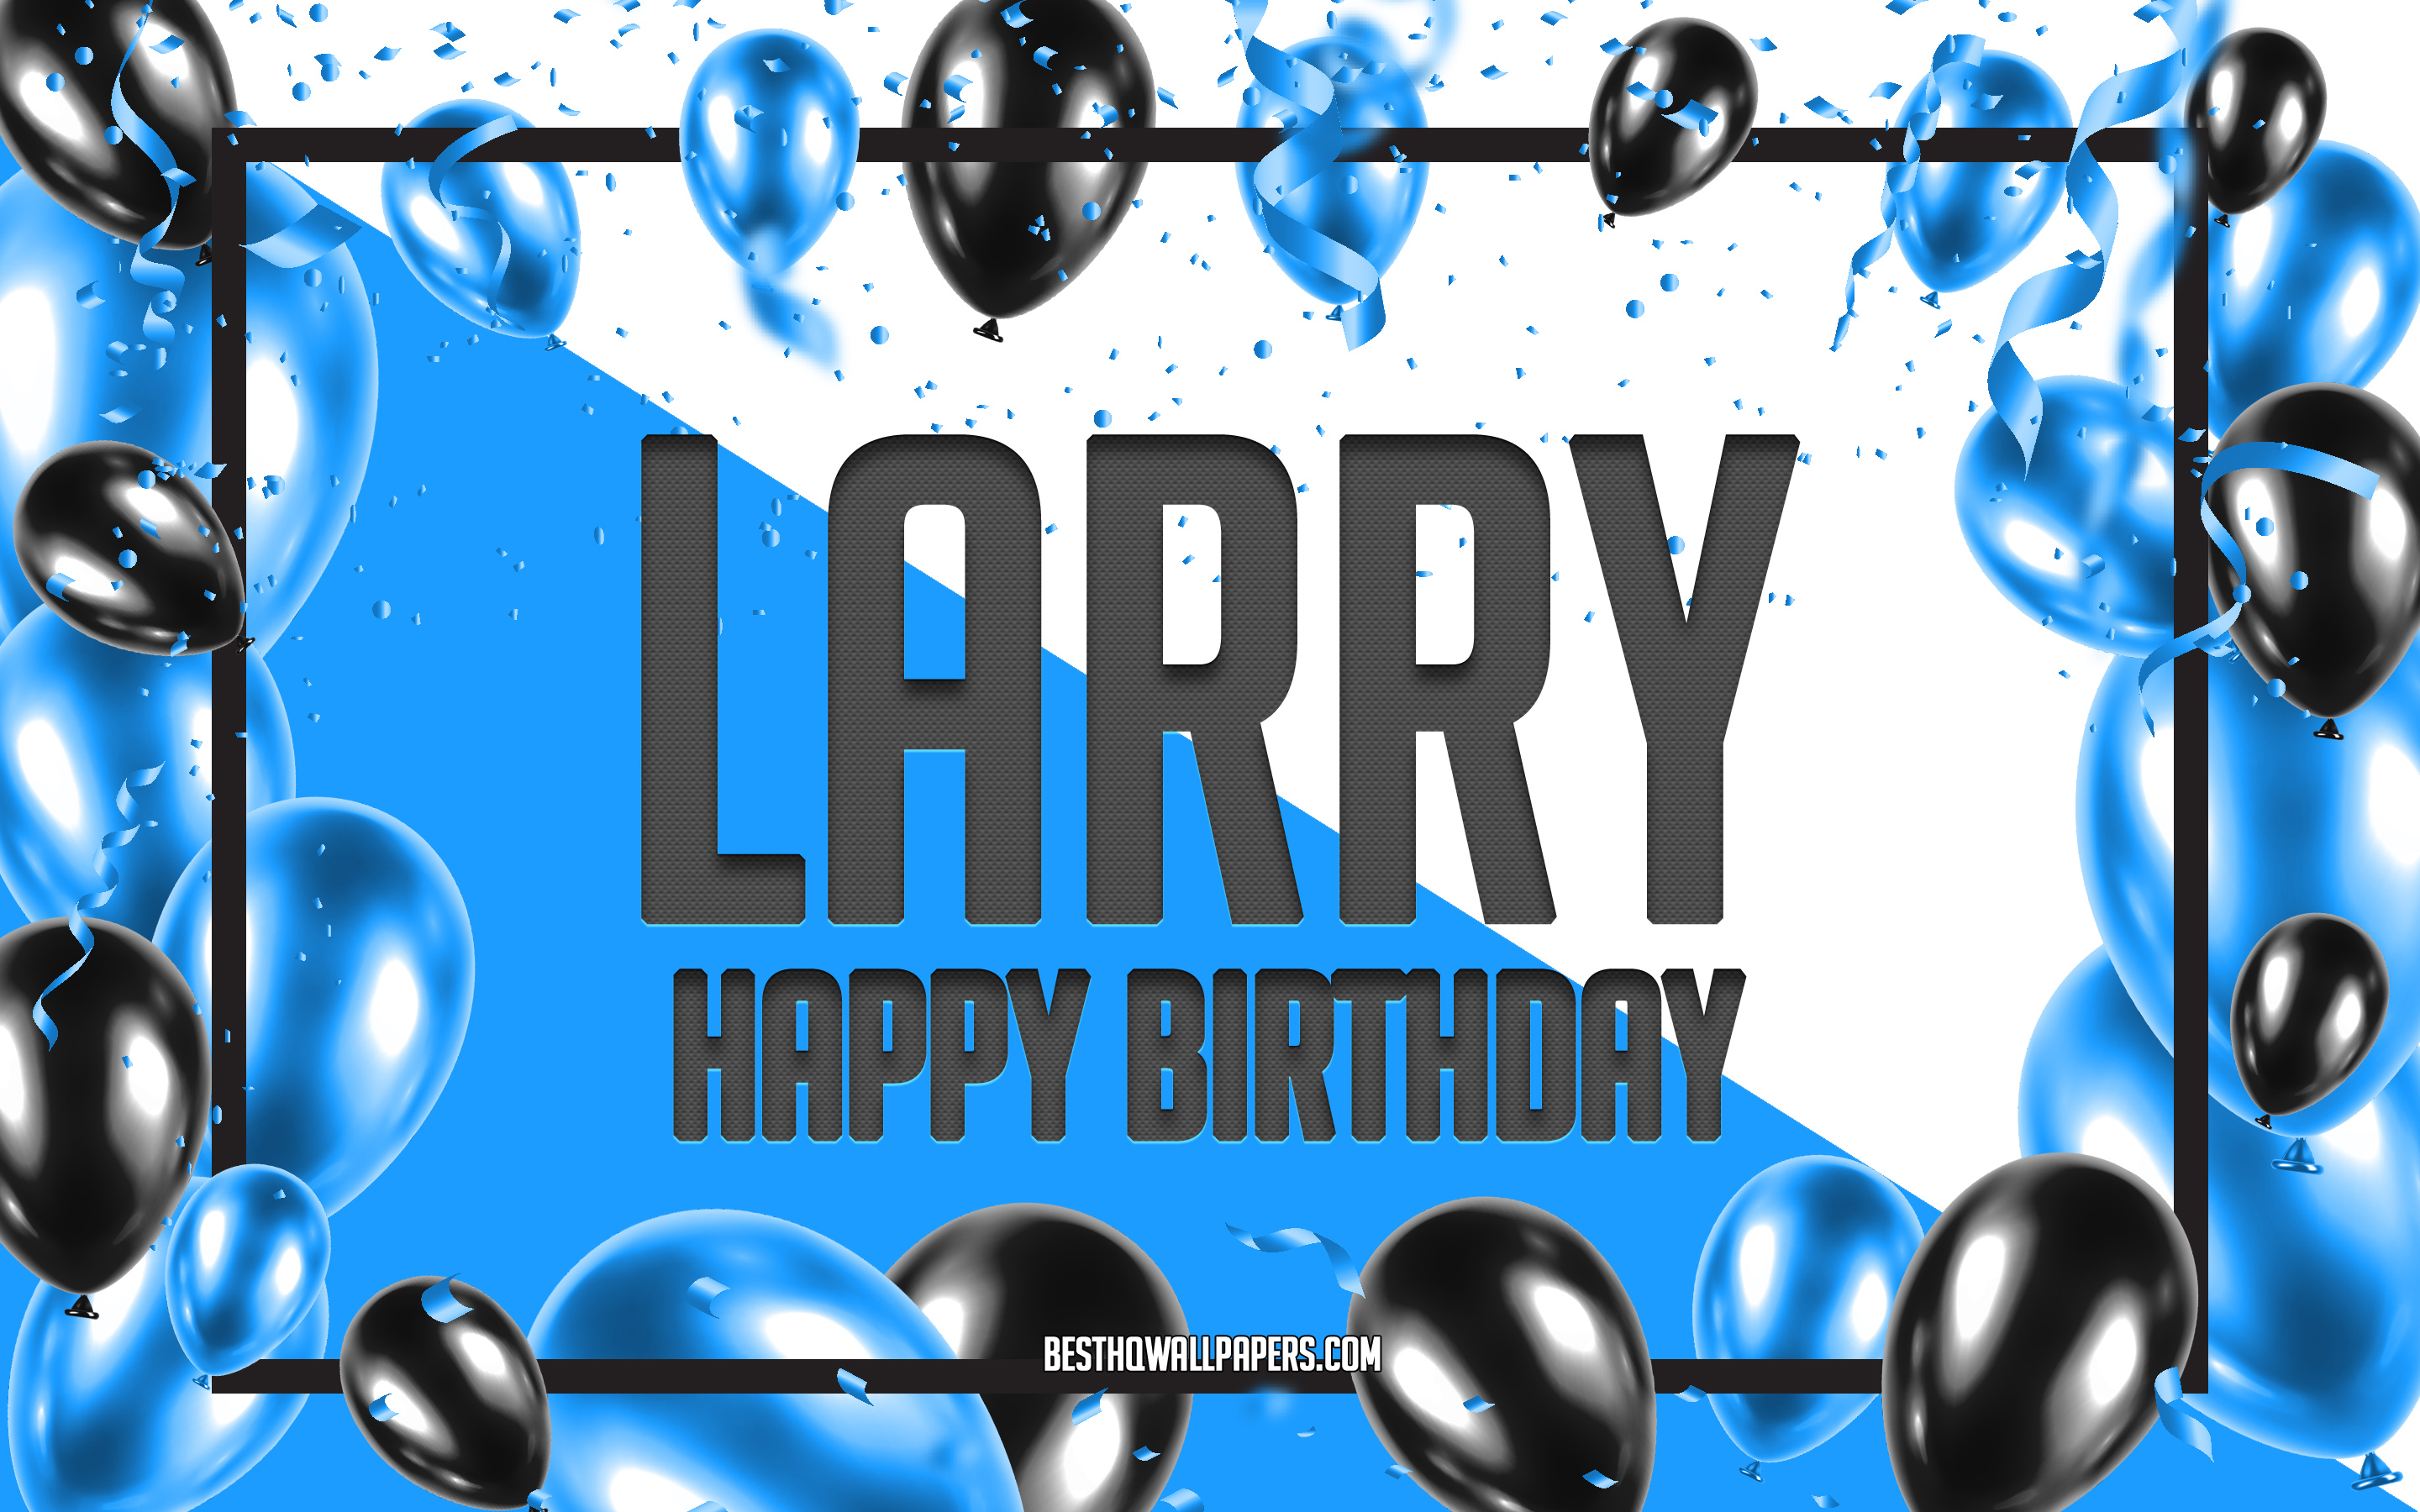 Download Wallpapers Happy Birthday Larry Birthday Balloons Background Larry Wallpapers With